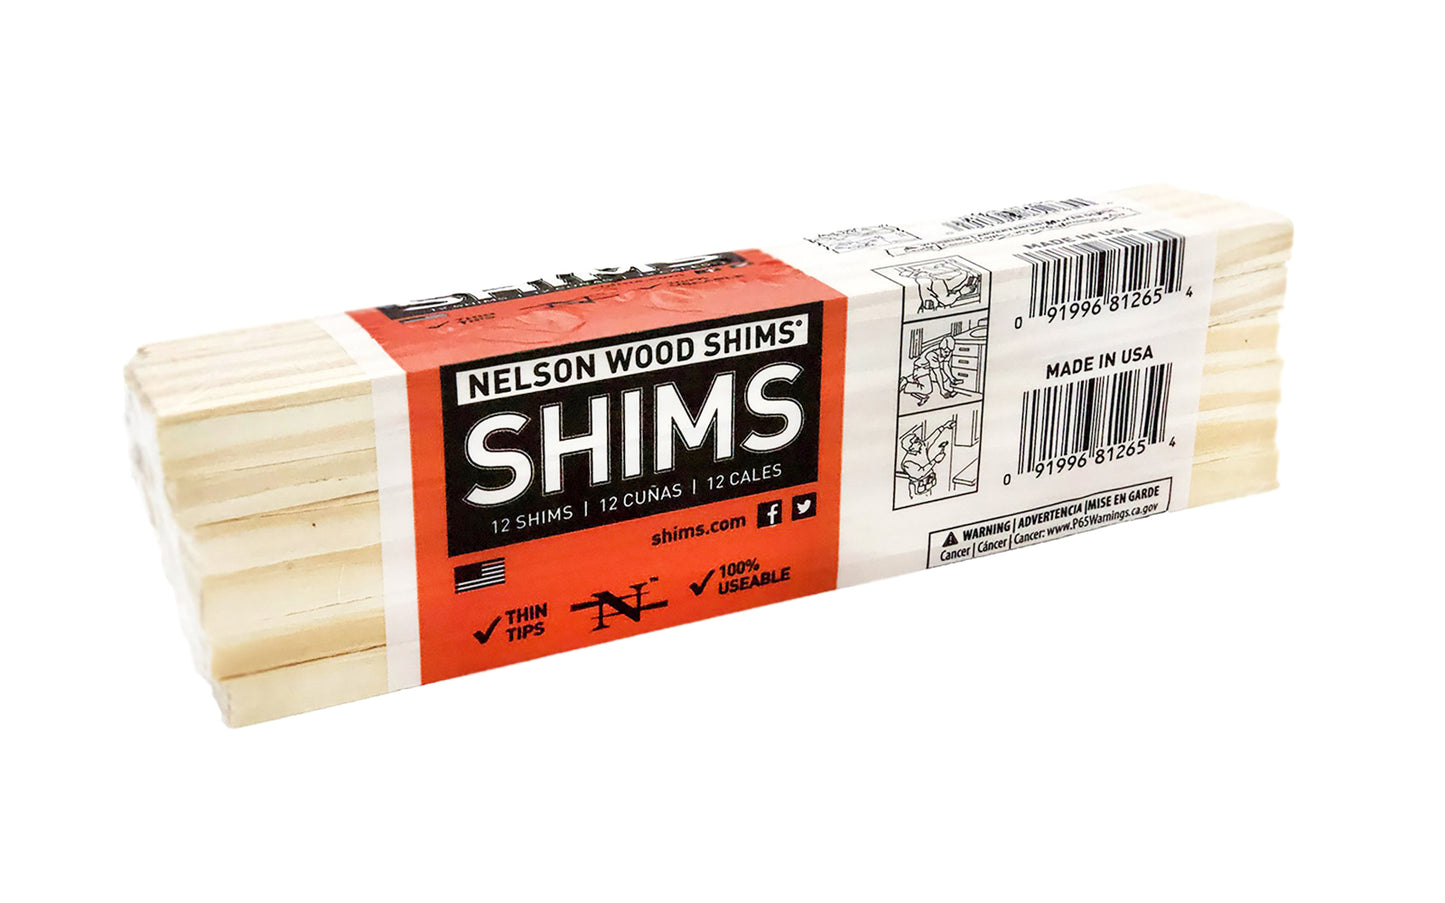 8" long Nelson Wood Shims are a favorite of the do-it-yourself type & contractors. Thin, feathered tips. 8" long x 1-3/8" wide shims in a Excellent for doors, windows, cabinets, countertops, etc. 12 pack bundle. DIY Wood Shim Bundle. 100% kiln dried. Made in USA.